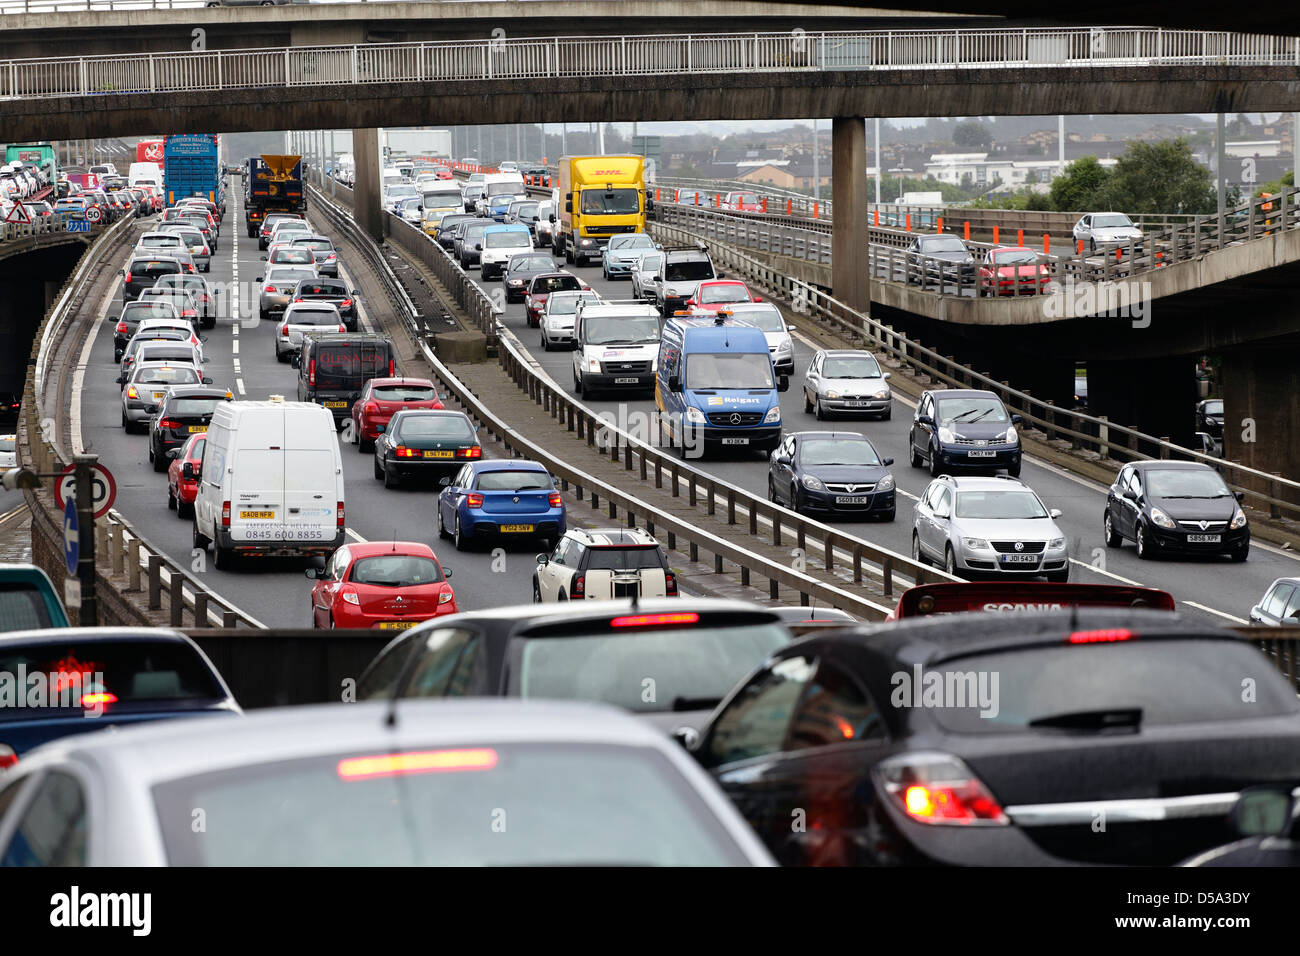 A traffic jam on the M8 Motorway and Kingston Bridge approach roads in Glasgow city centre, Scotland, UK Stock Photo